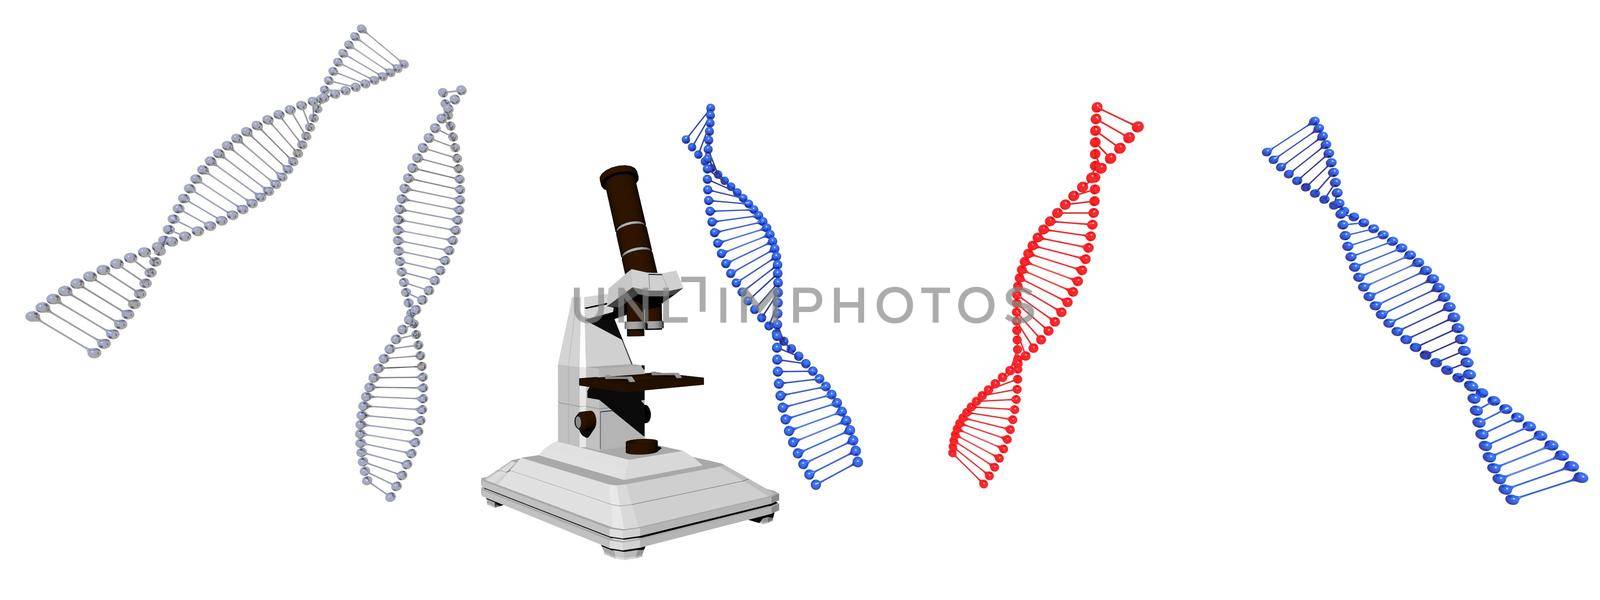 dna symbol on it isolated in white background - 3d rendering by mariephotos